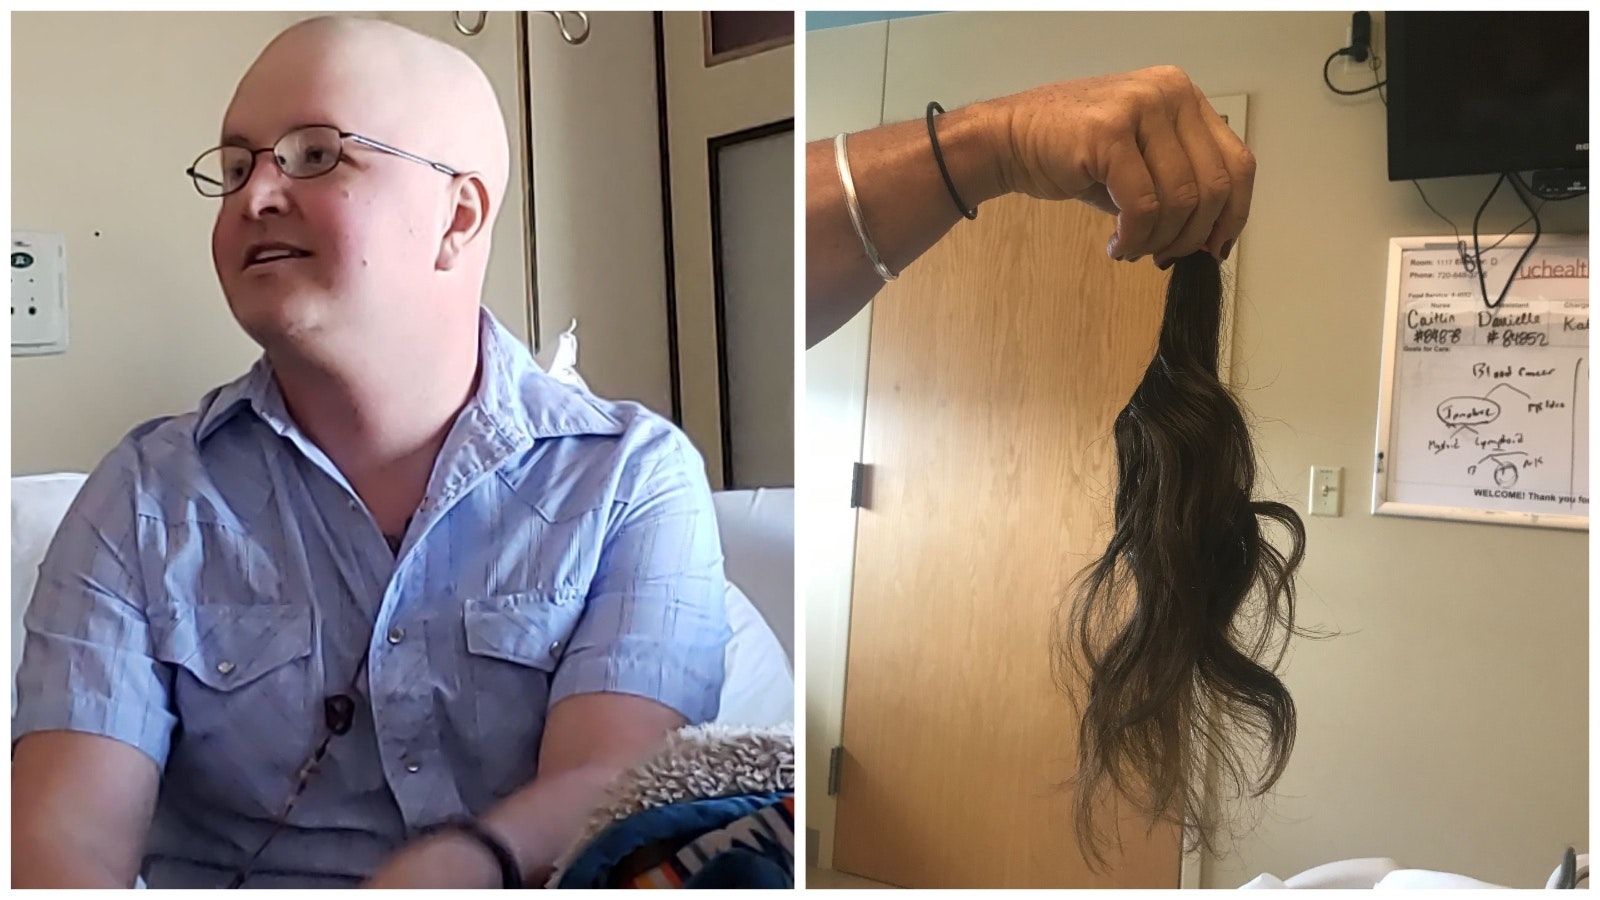 Chemotherapy brought on a dramatic physical change, left. But forefoot, Nathan Kissack donated his hair to a charity that makes wigs for sick kids, right.